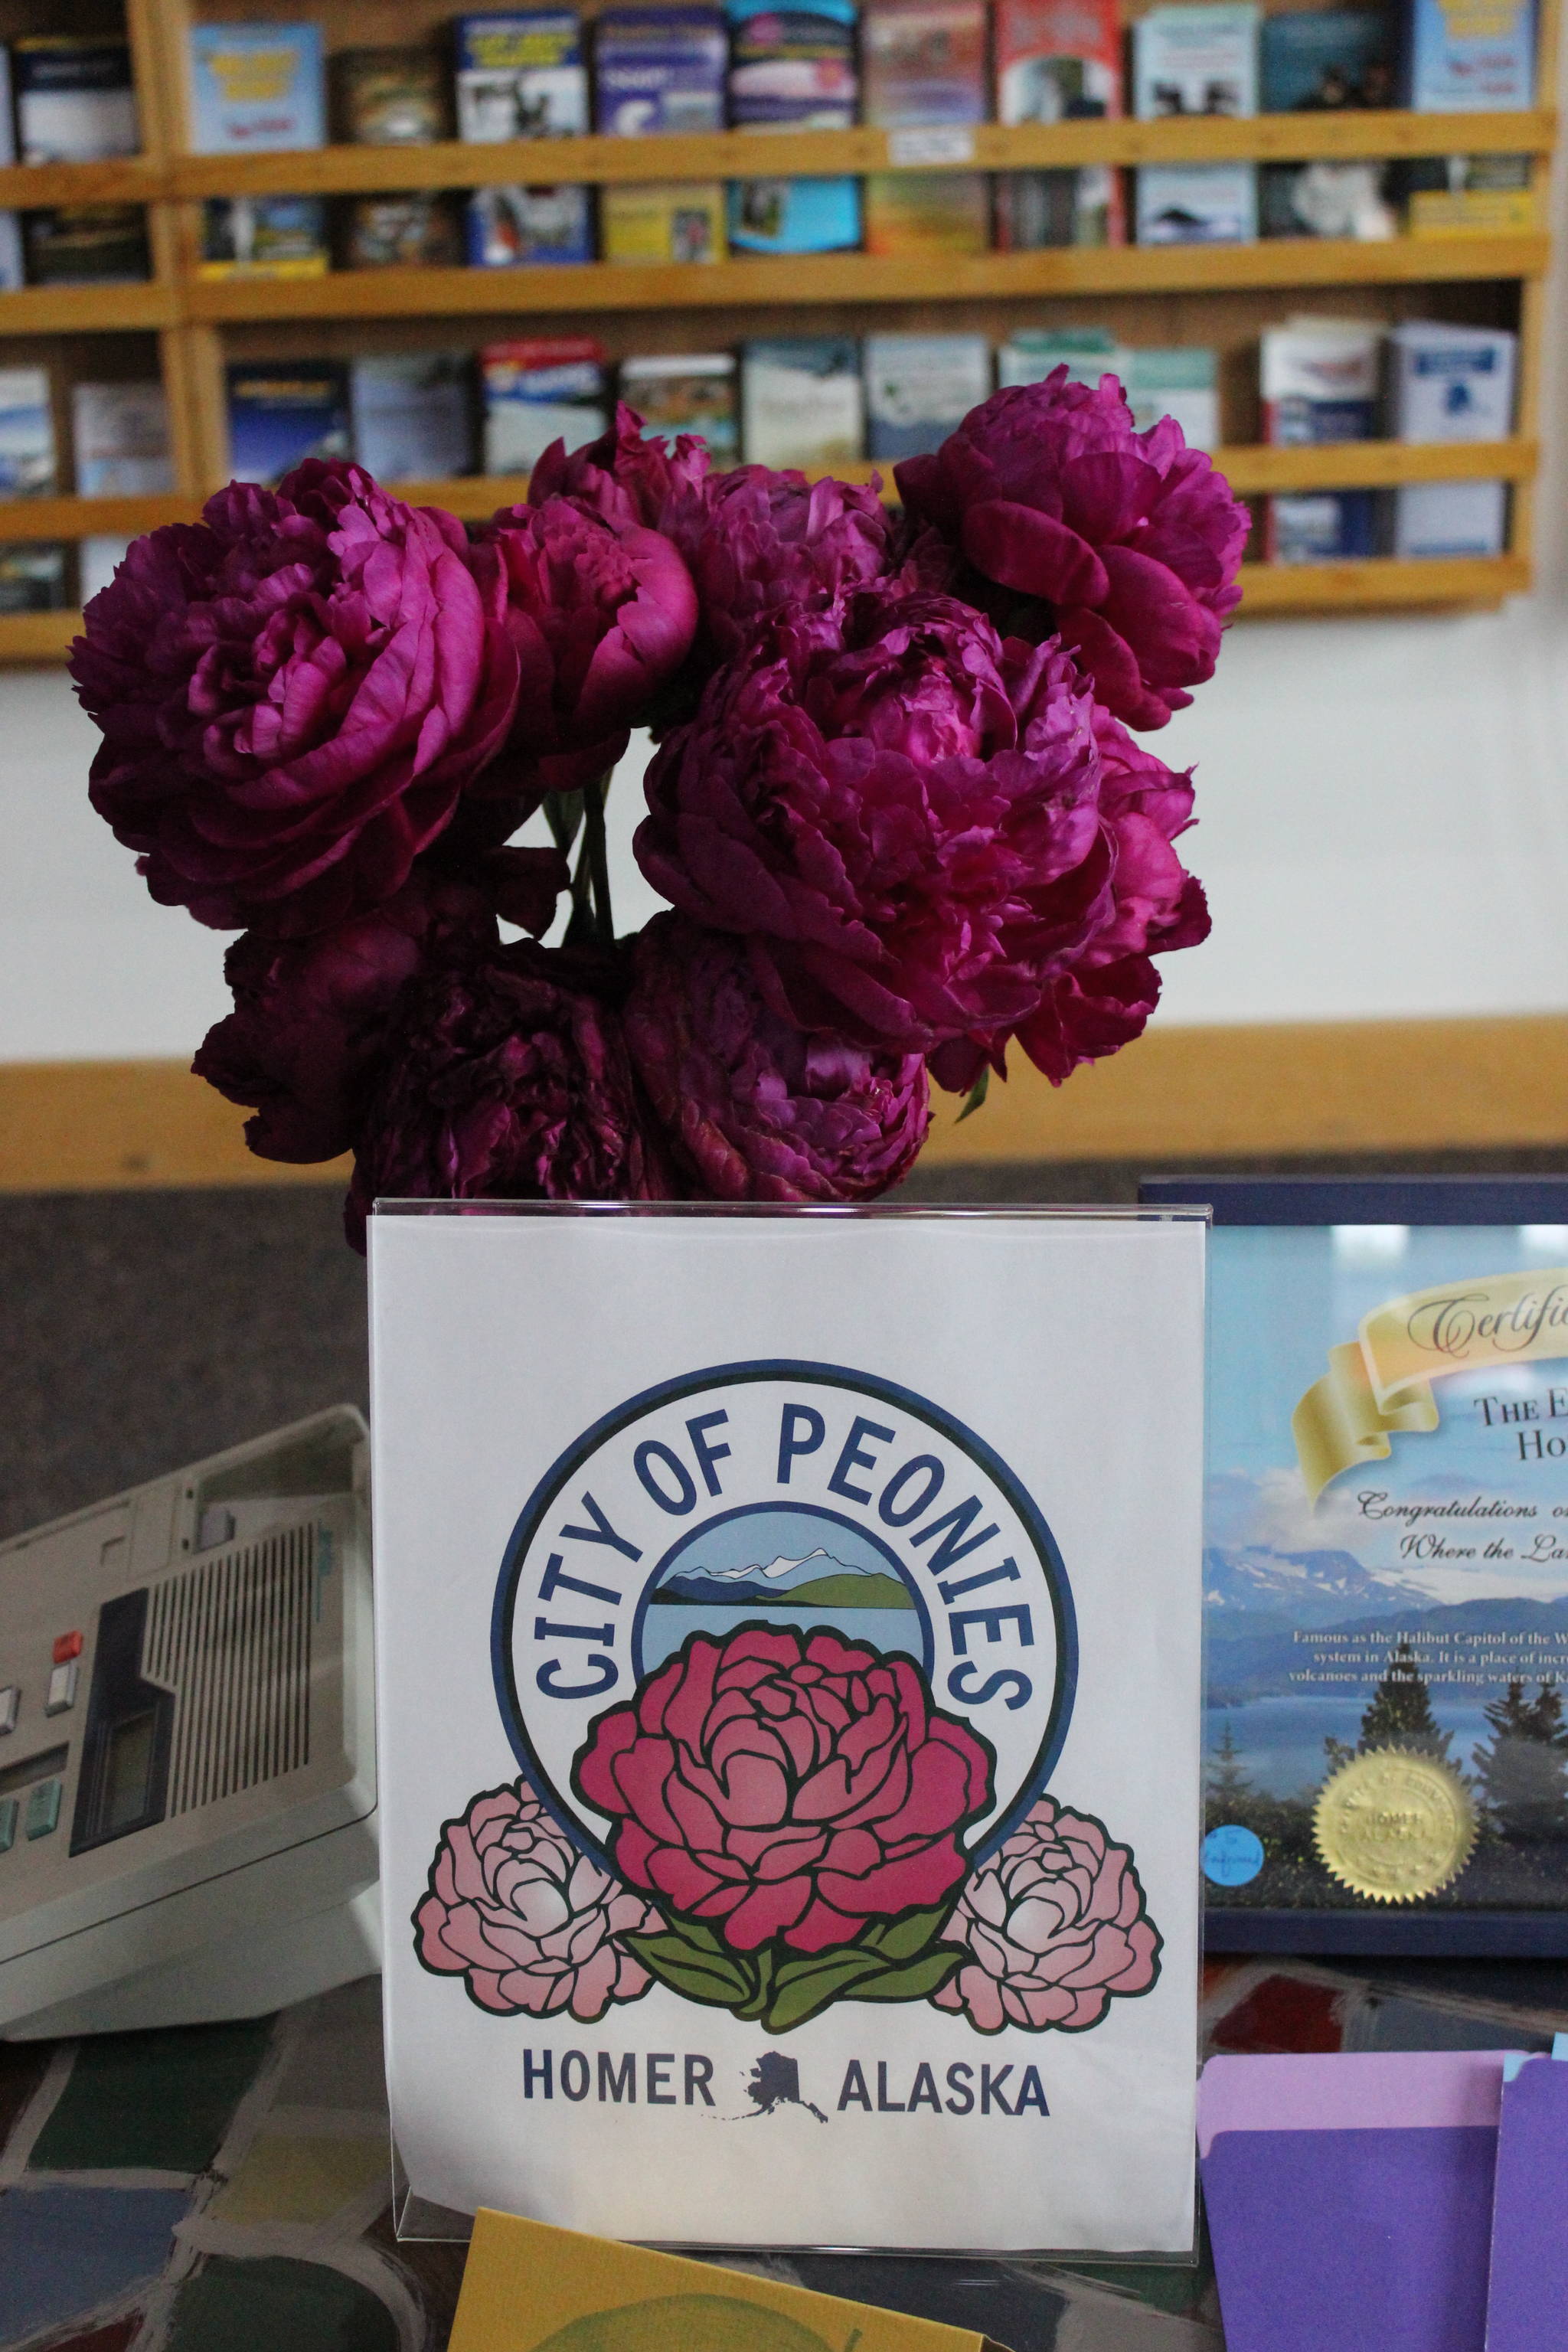 Homer peonies hold special place in Homer, holiday and beyond